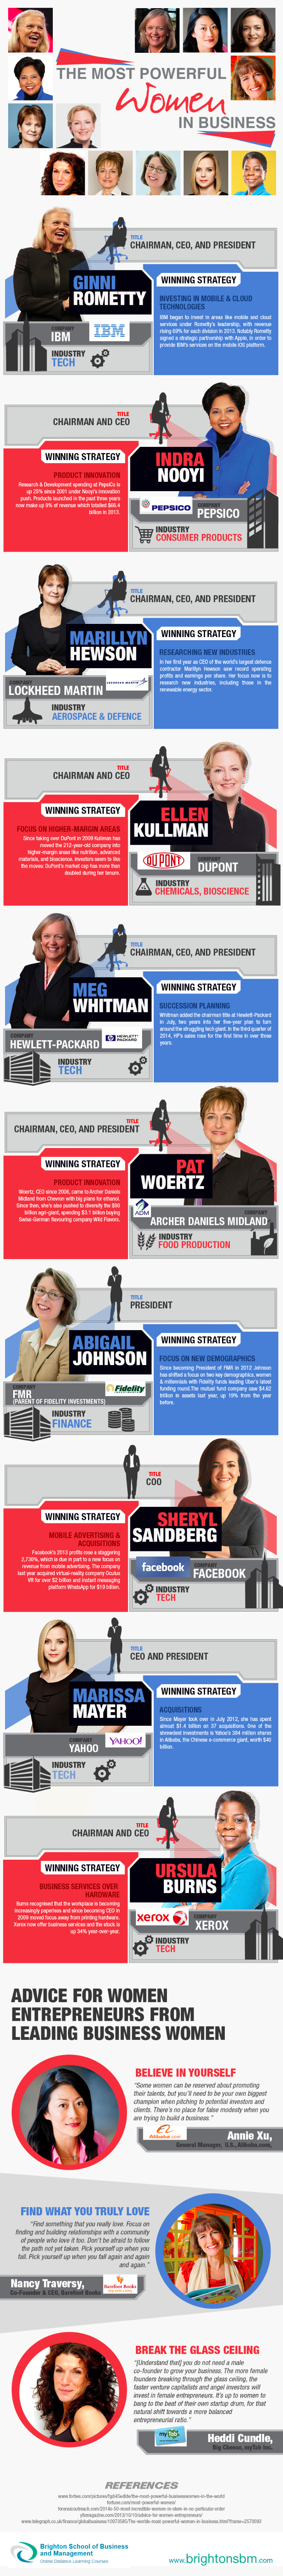 Most-Powerful-Women-in-Business